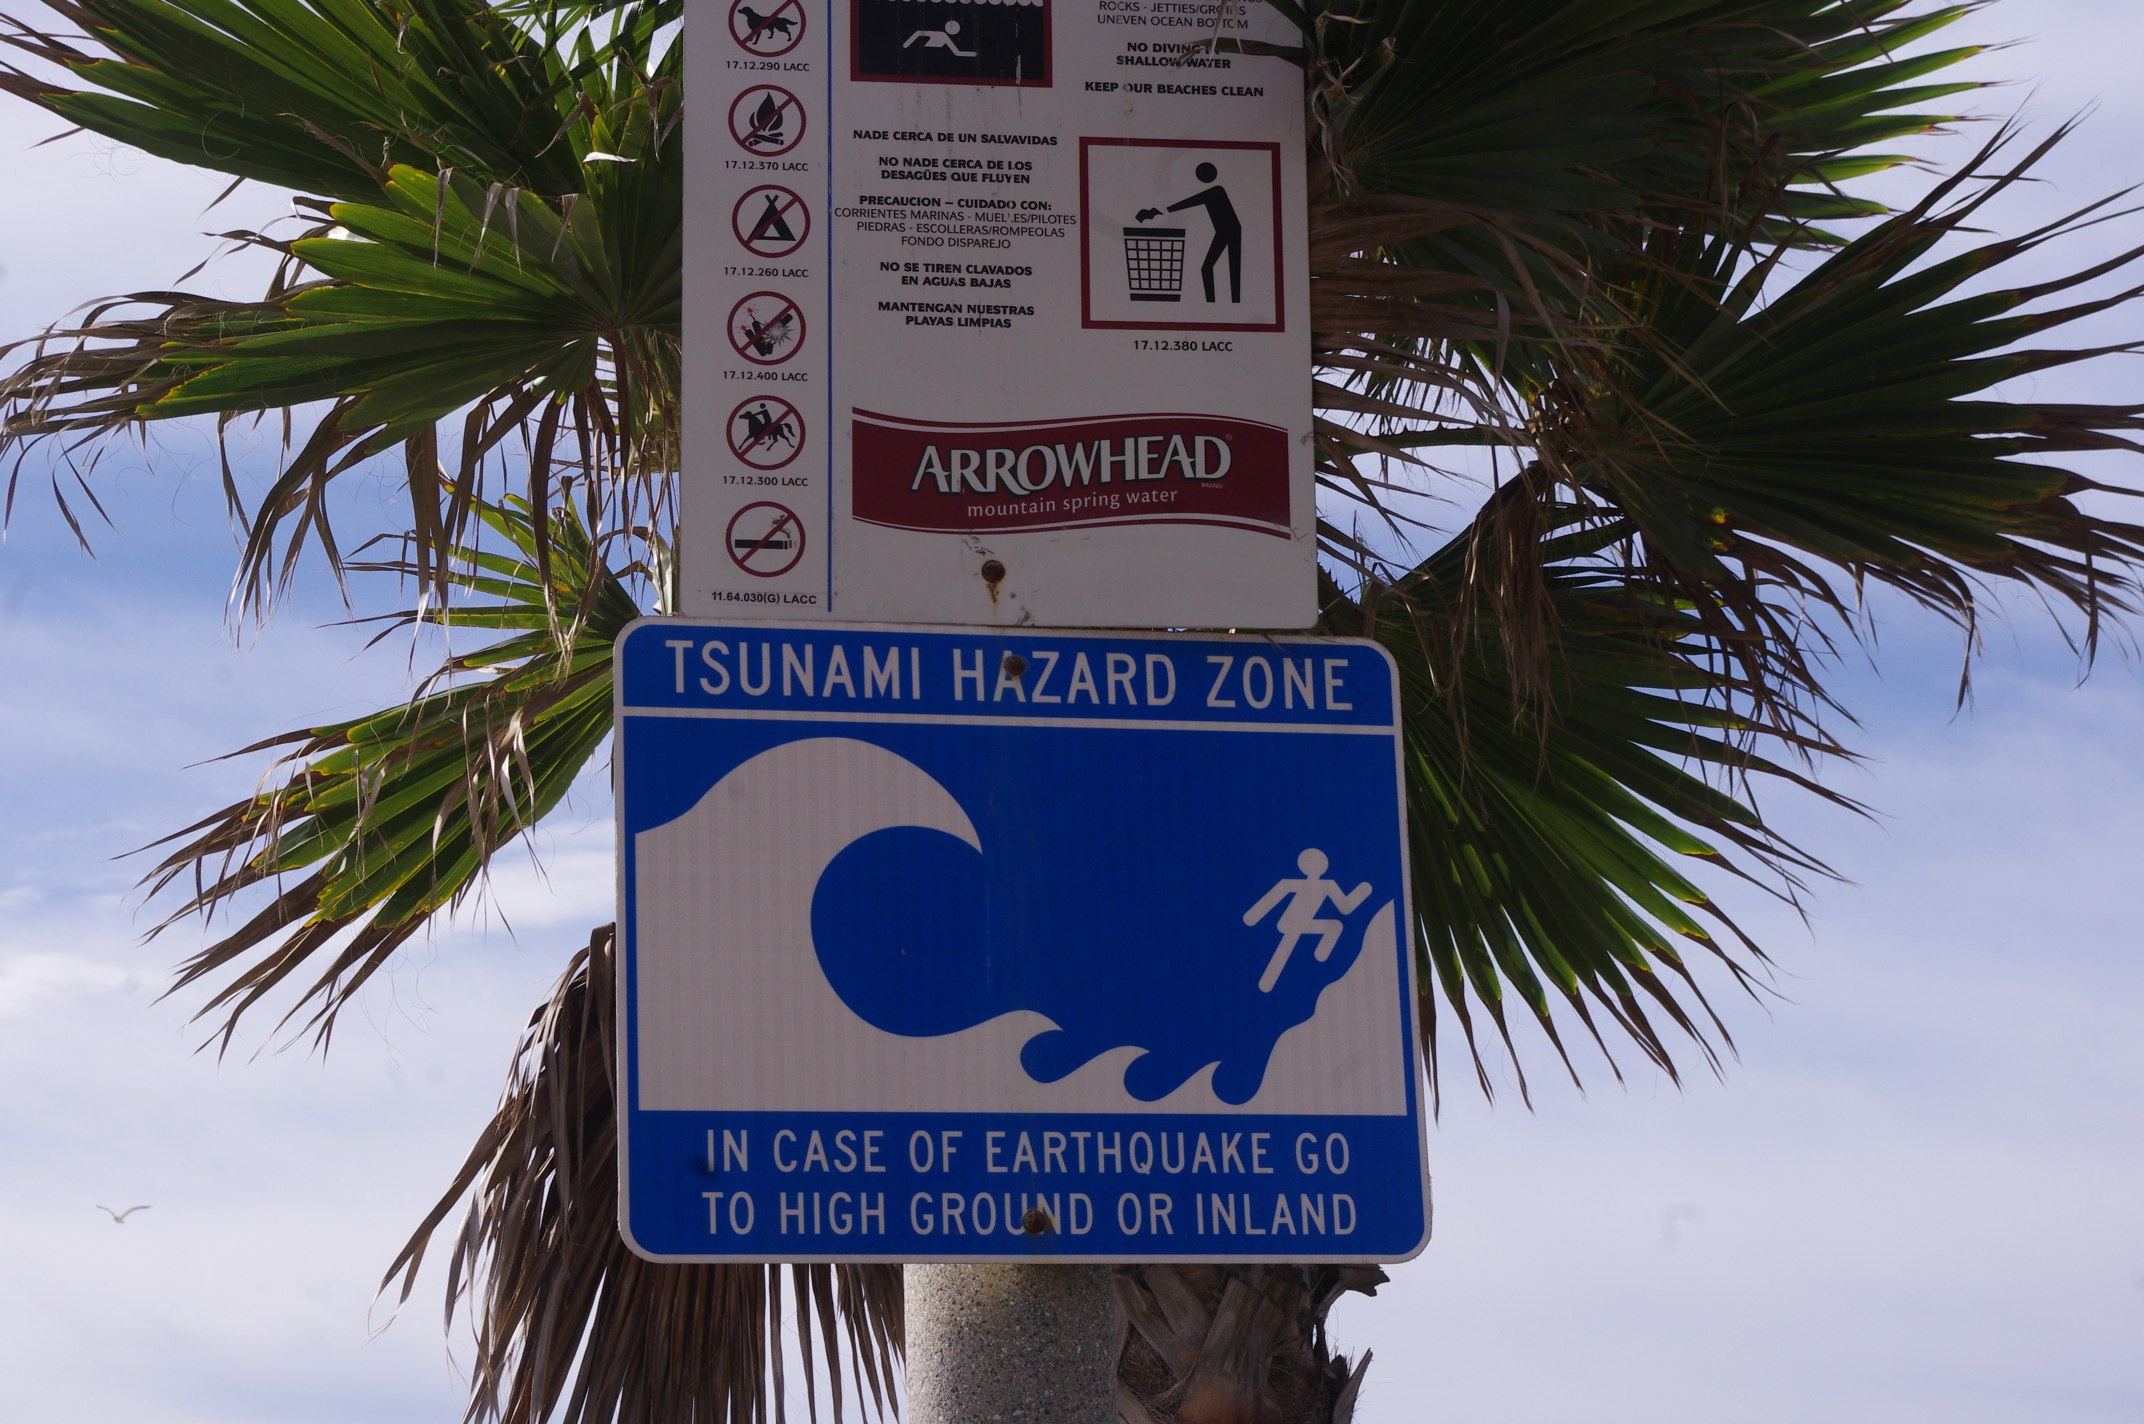 a street sign in front of a palm tree